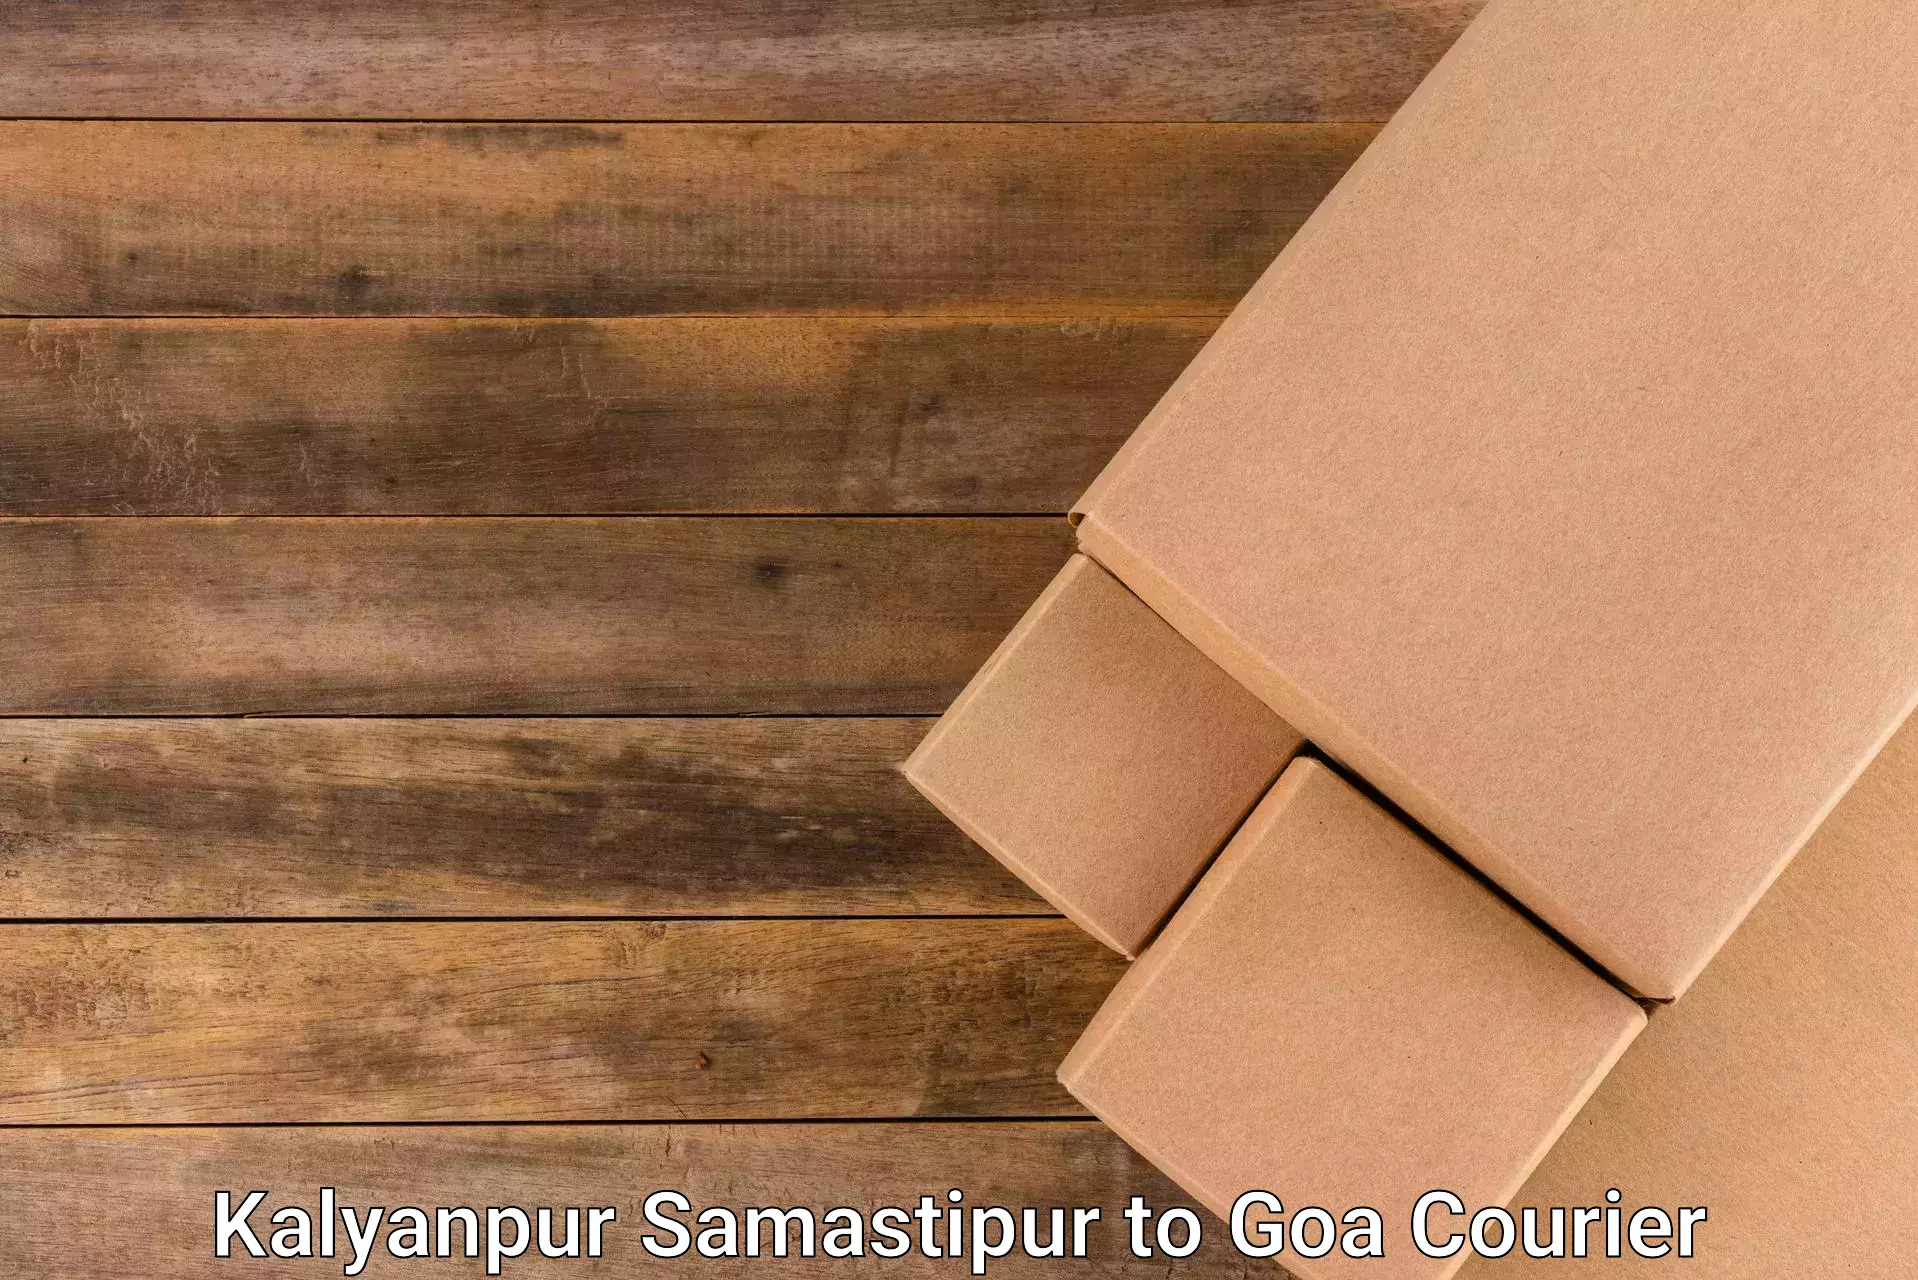 Holiday shipping services Kalyanpur Samastipur to South Goa